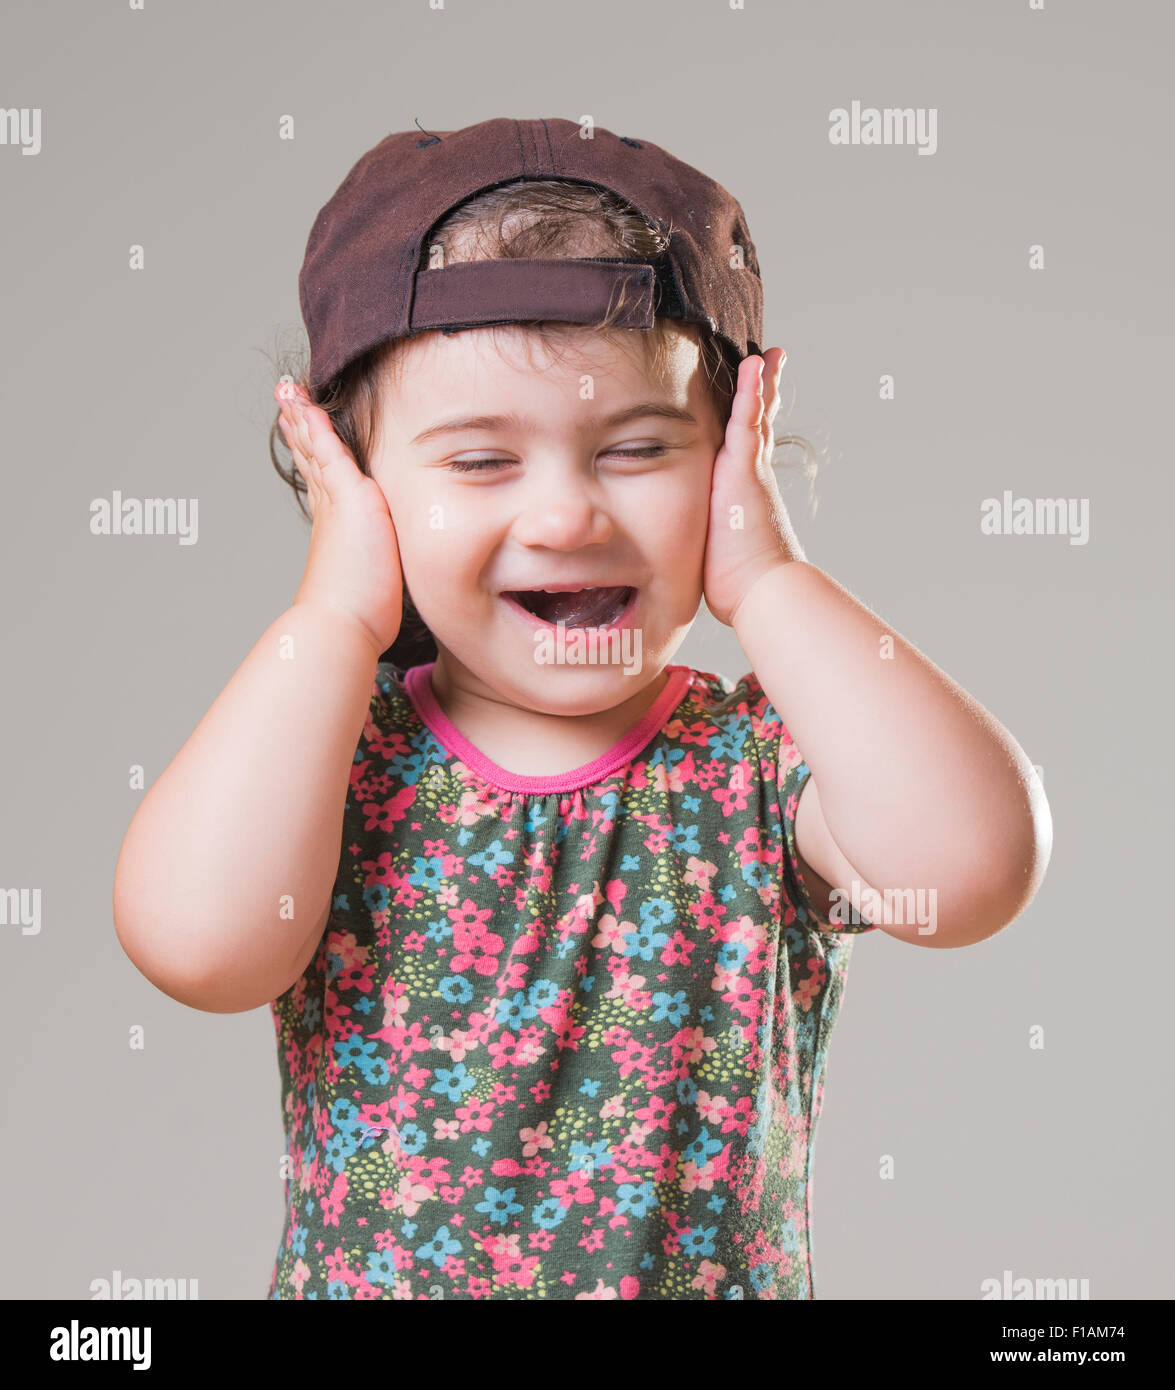 cute baby girl with a big black baseball hat Stock Photo